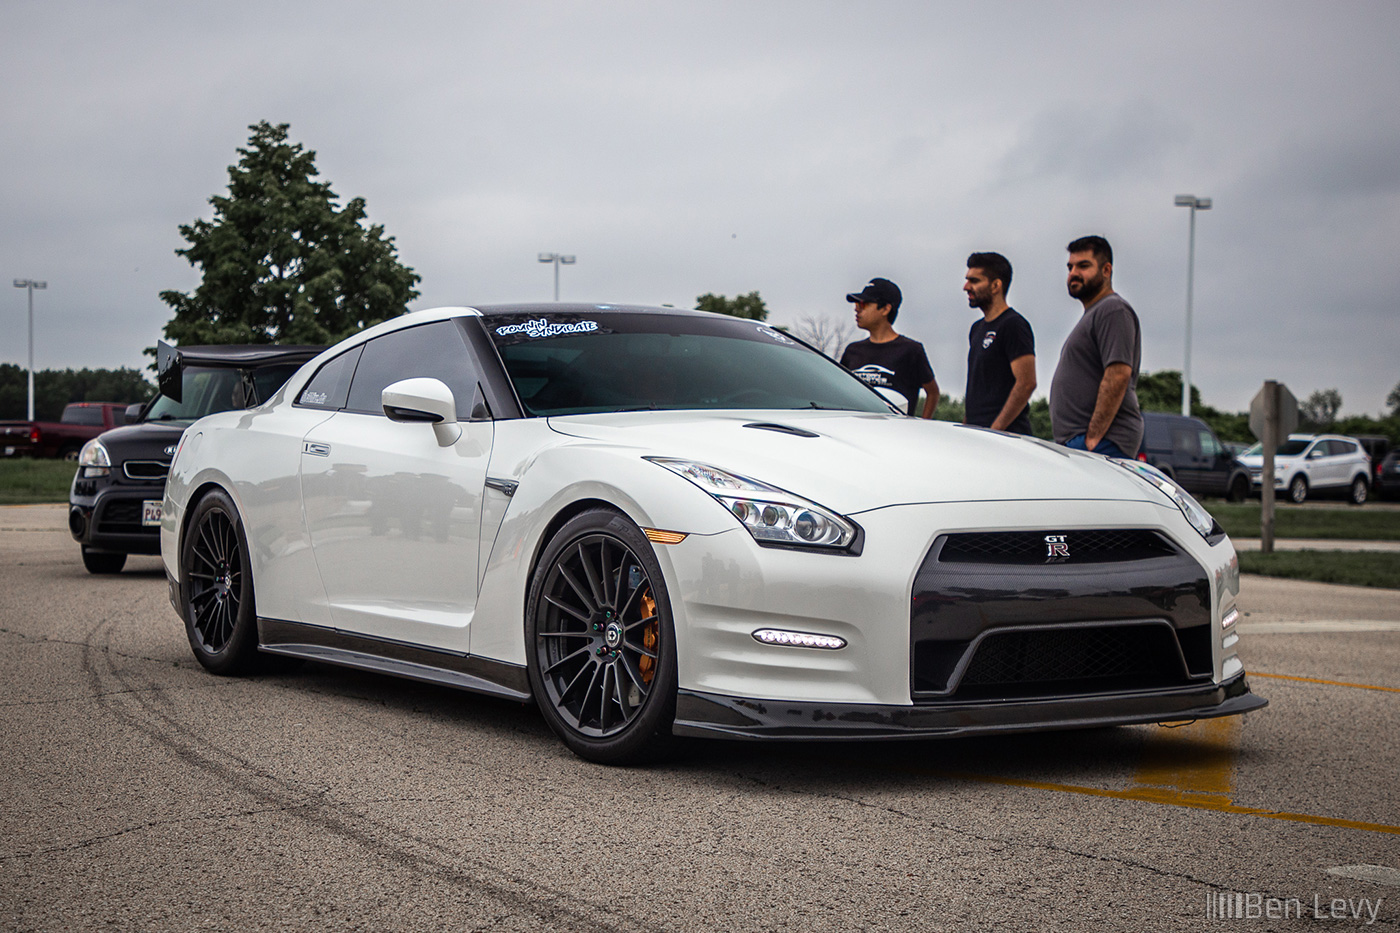 White Nissan GT-R with Rounin Syndacite